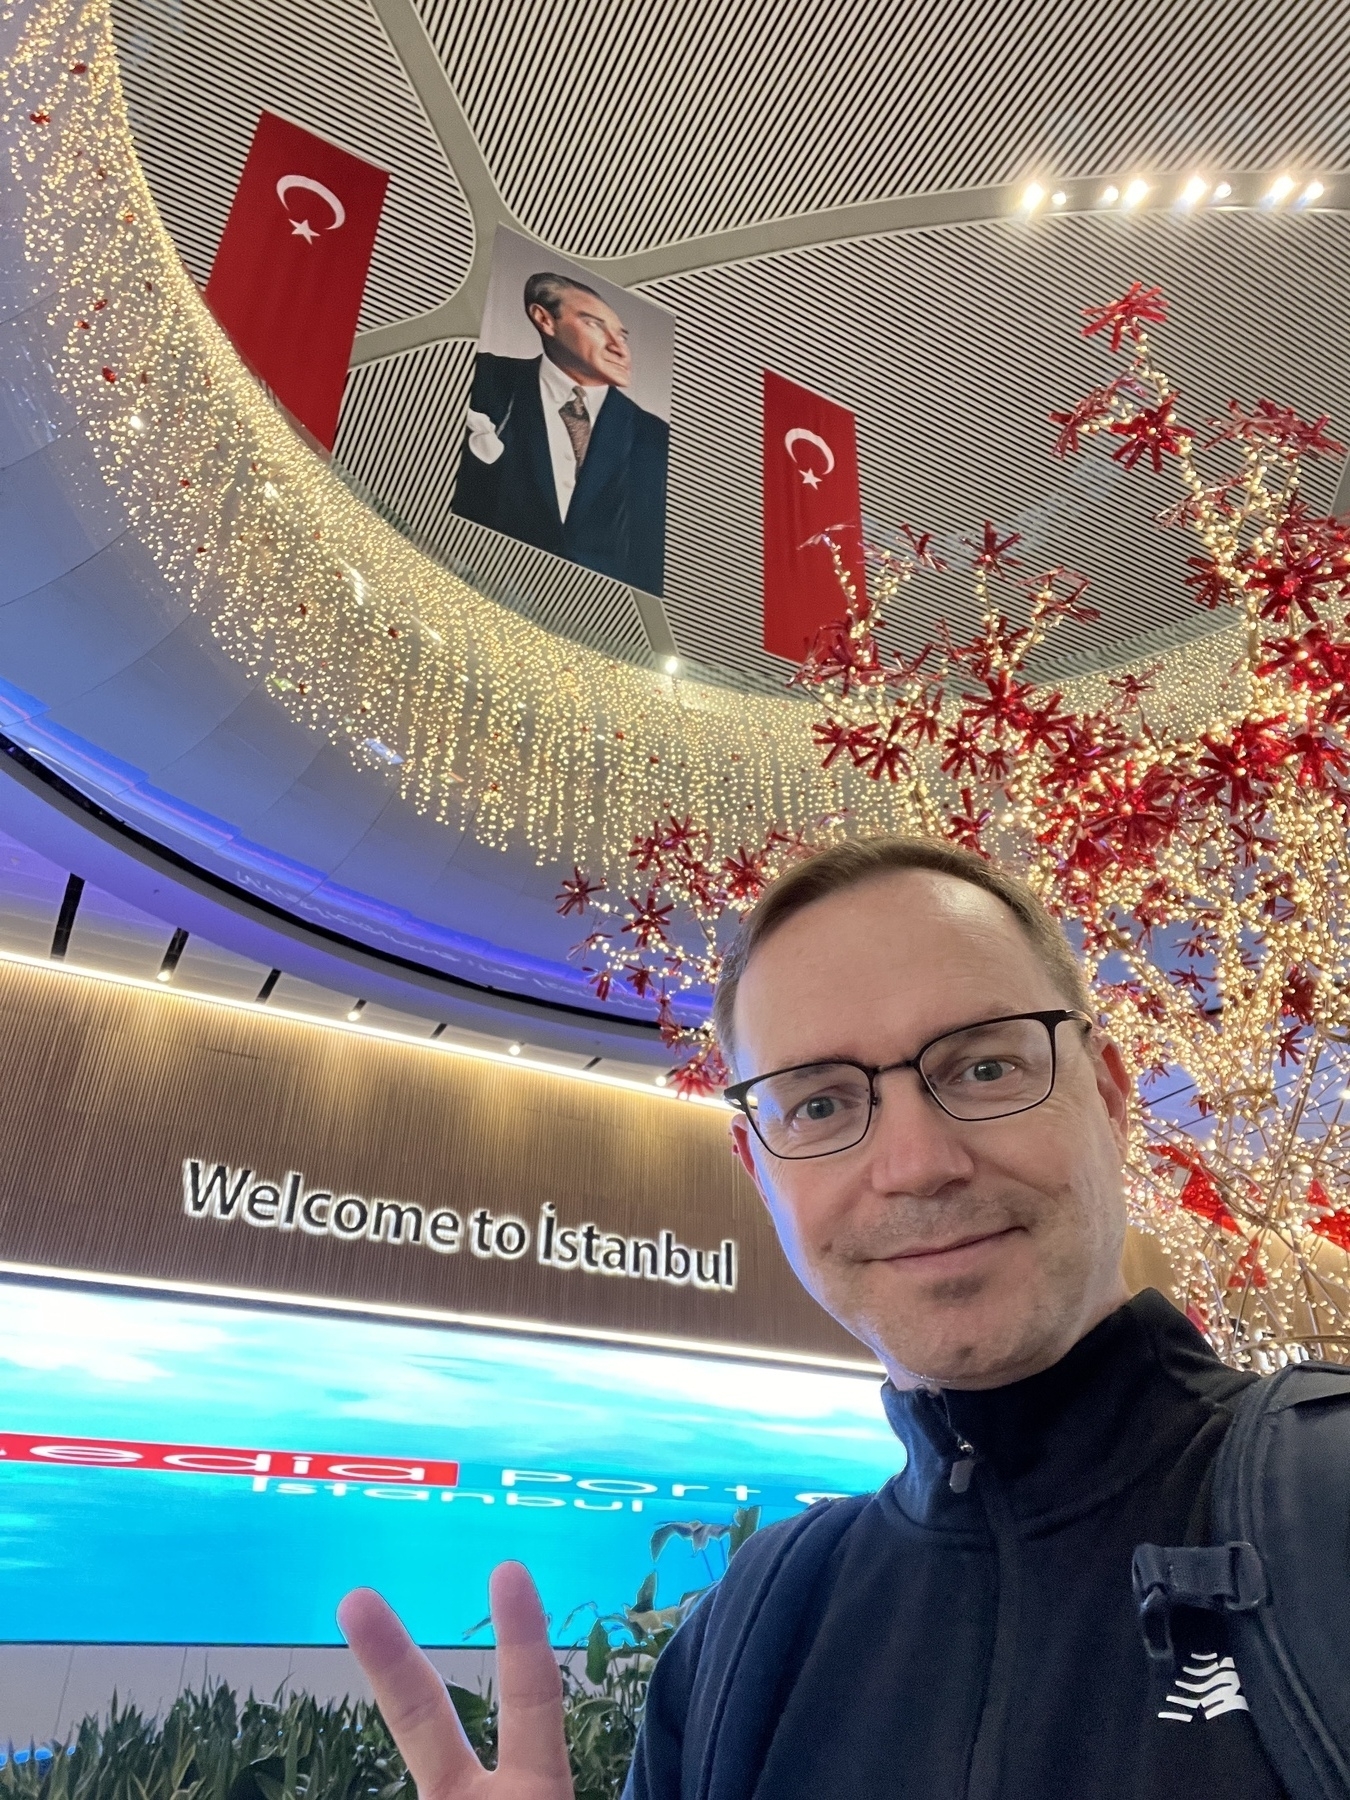 Chad selfie at the baggage claim exit in the Istanbul airport posing with the welcome sign, a huge light display, and a large image of Mustafa Kemal Attaturk